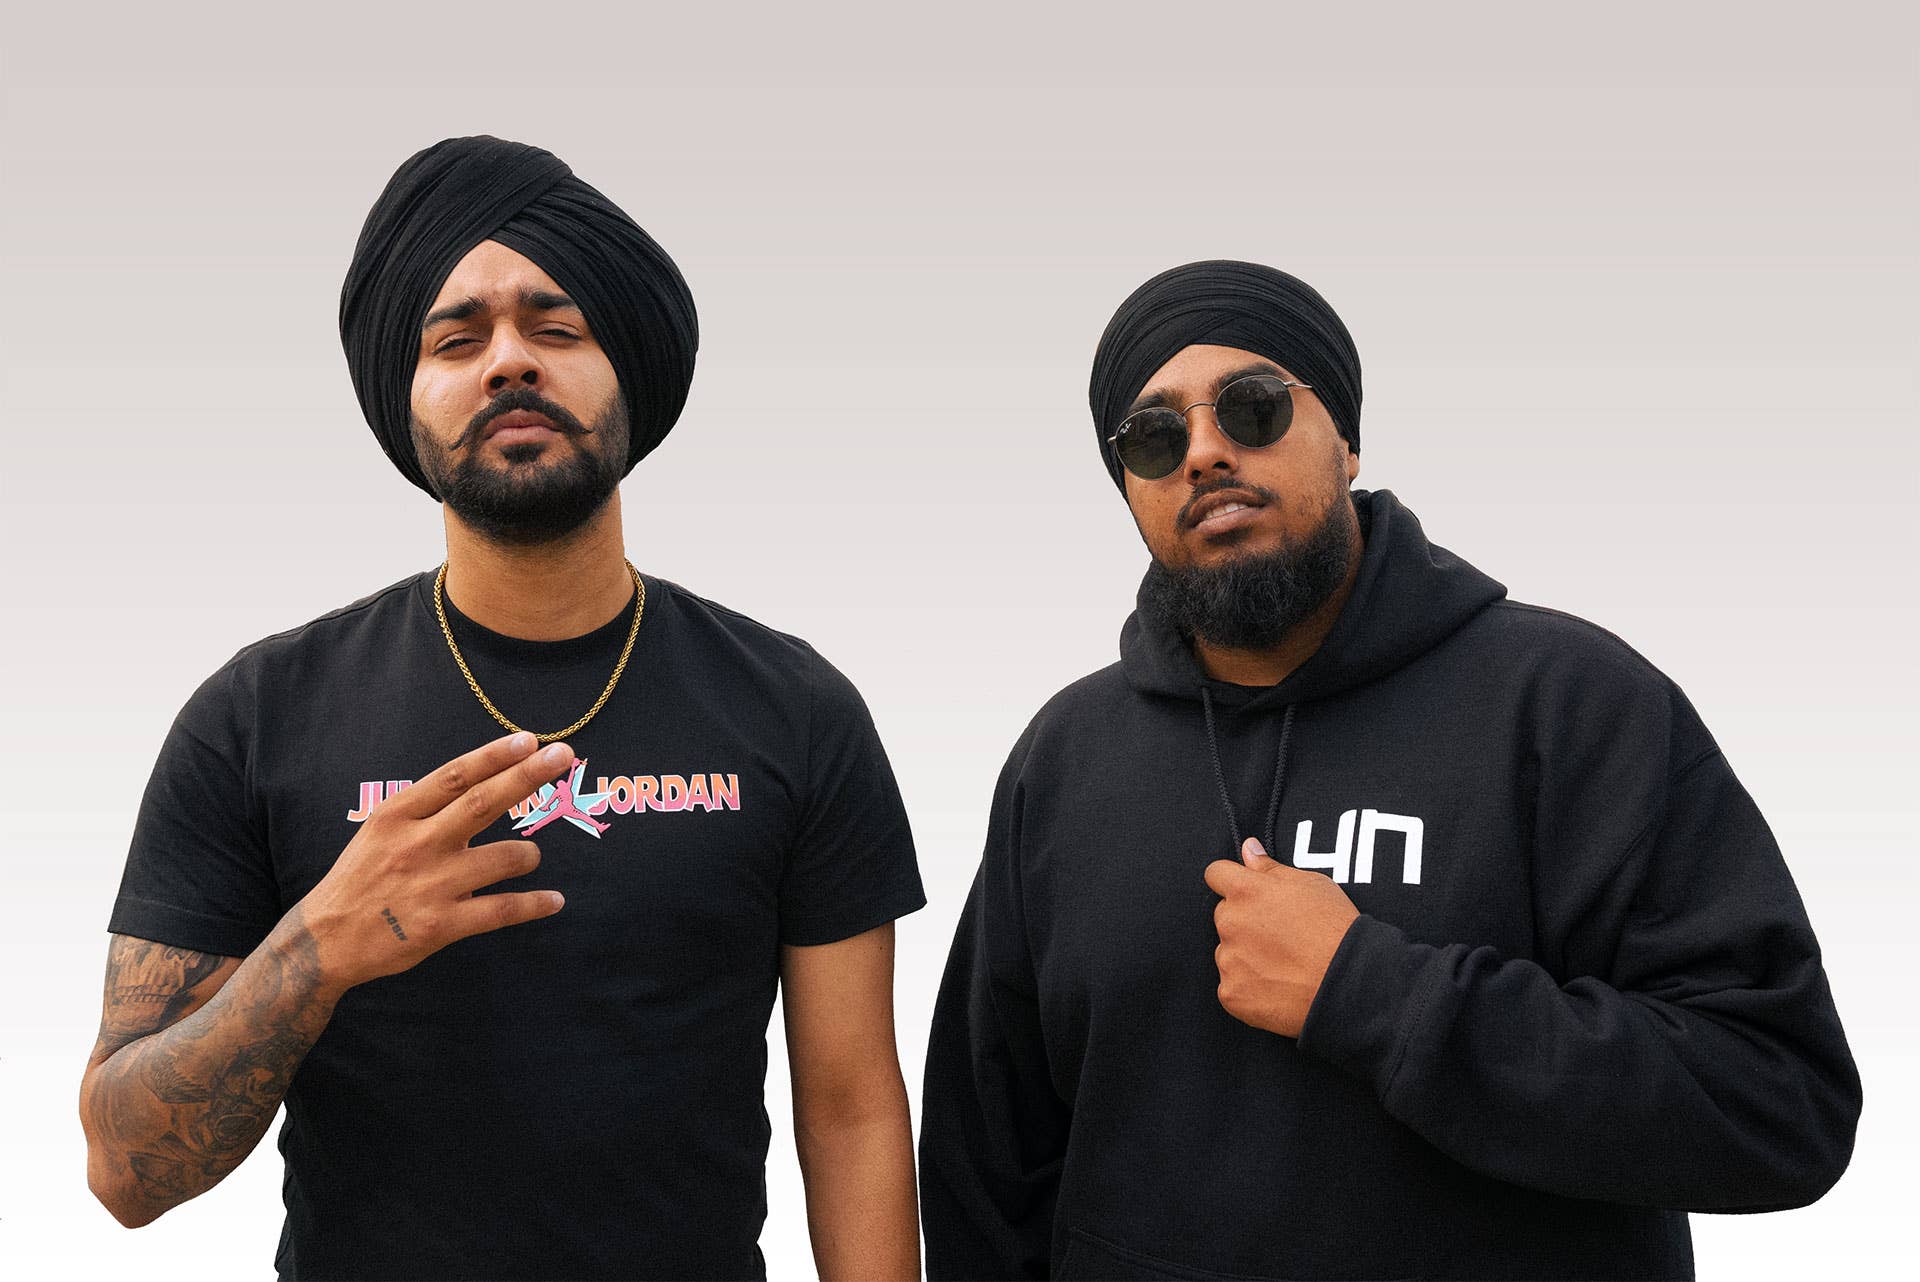 Canadian-Indian hip-hop artists Ikky and nSeeB